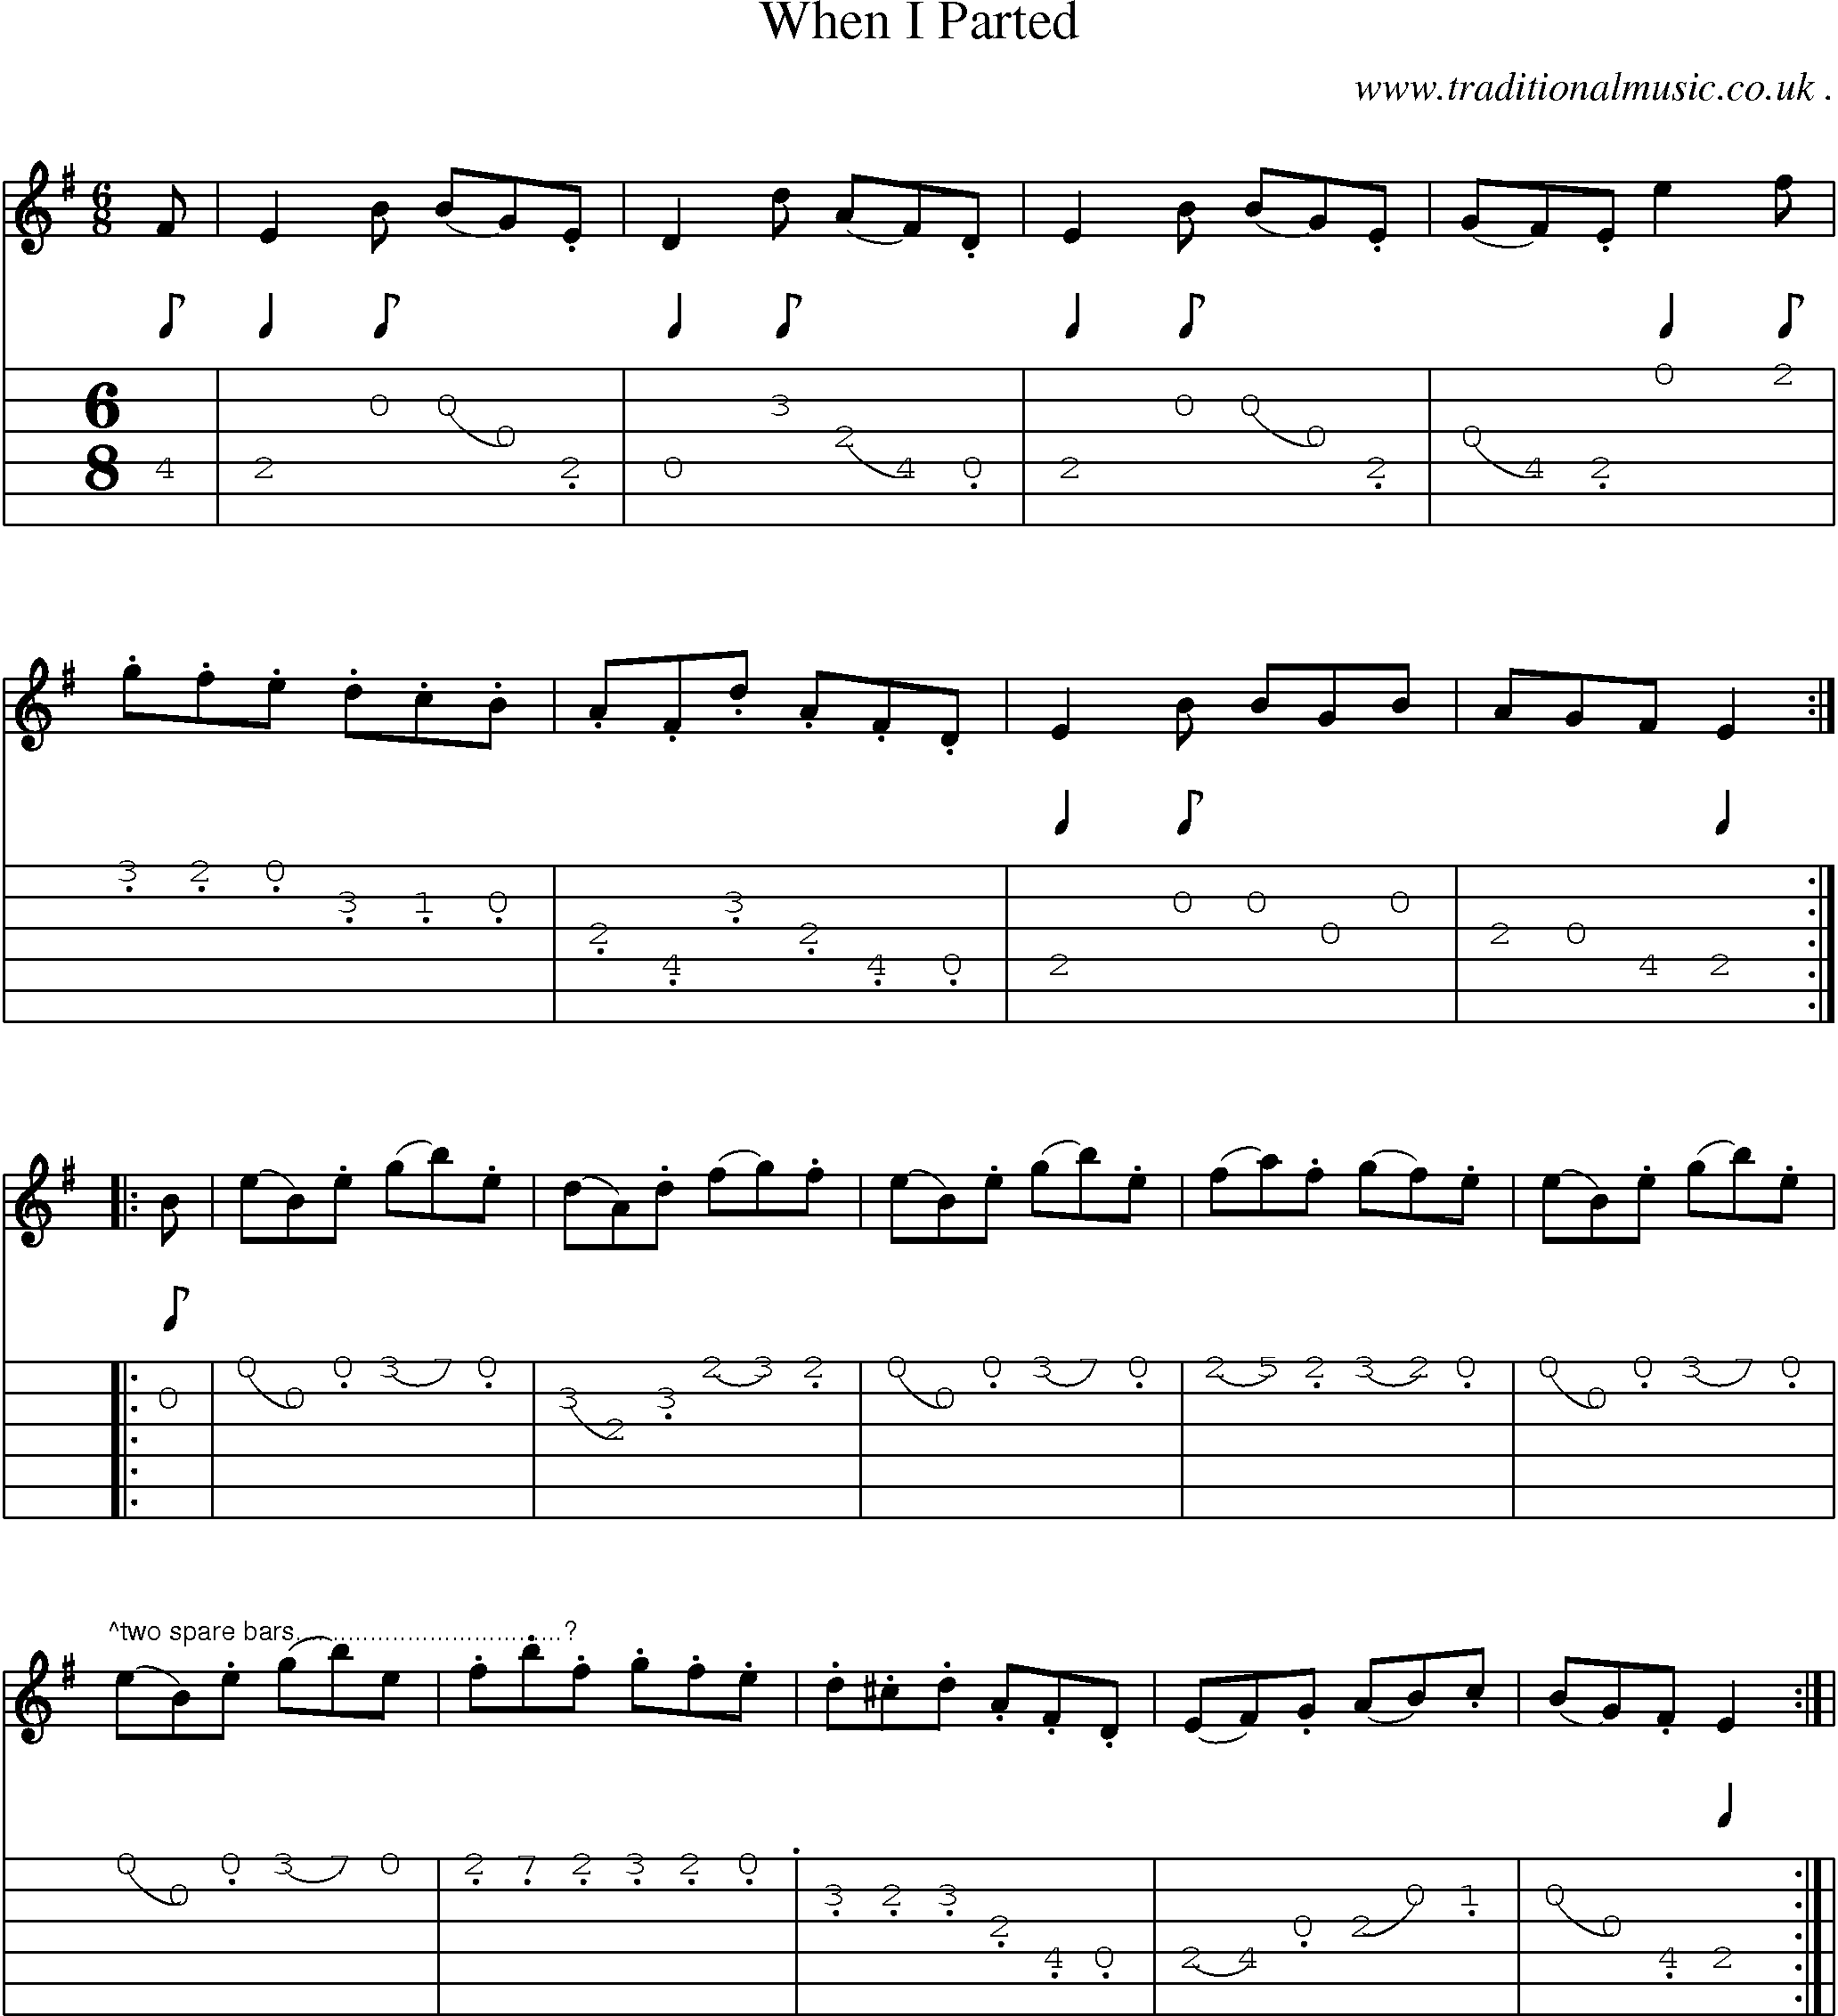 Sheet-Music and Guitar Tabs for When I Parted